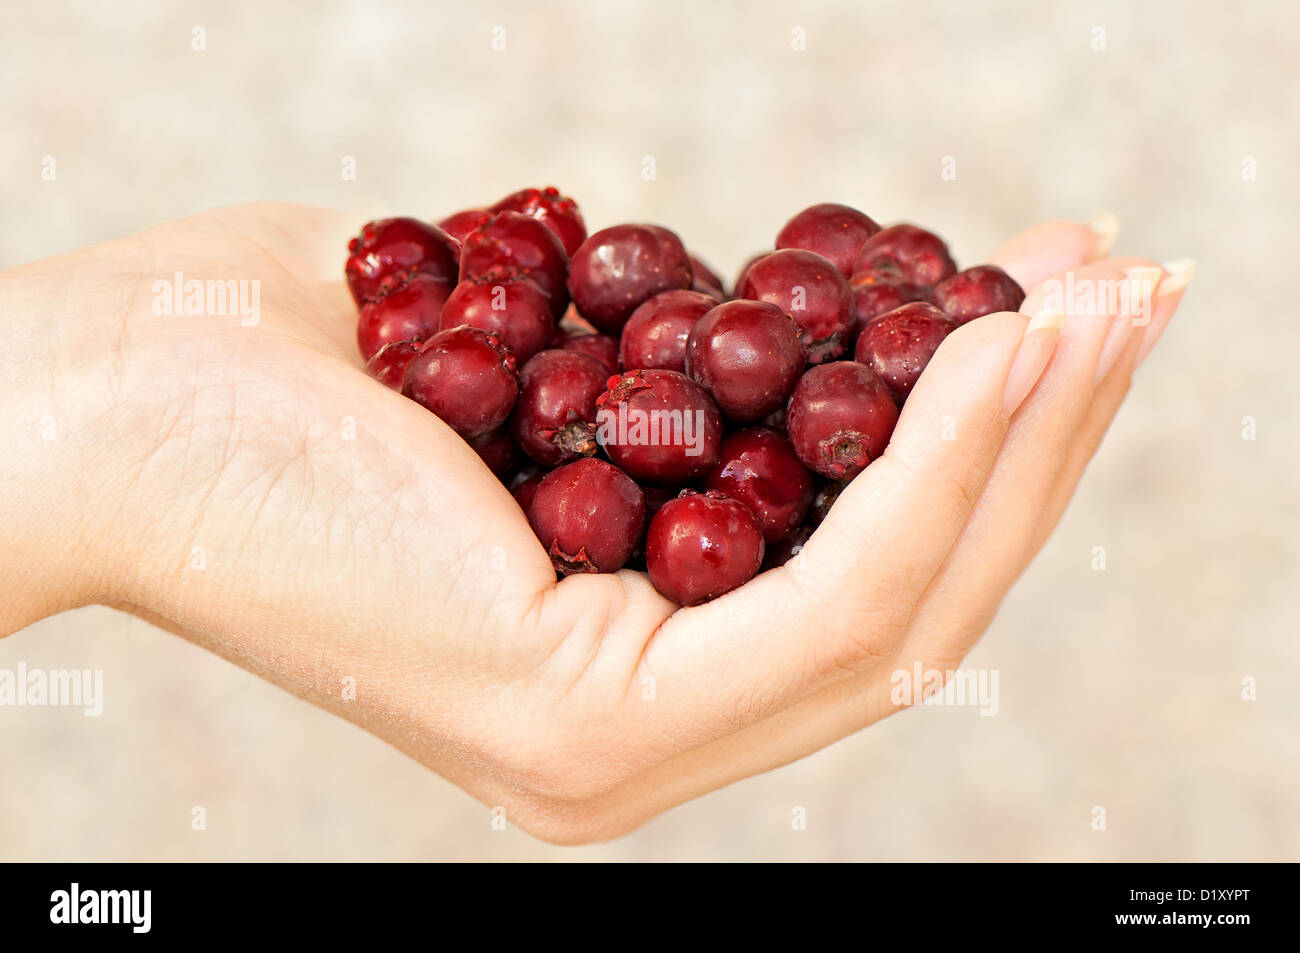 Woman's hand holding red haw berry Stock Photo